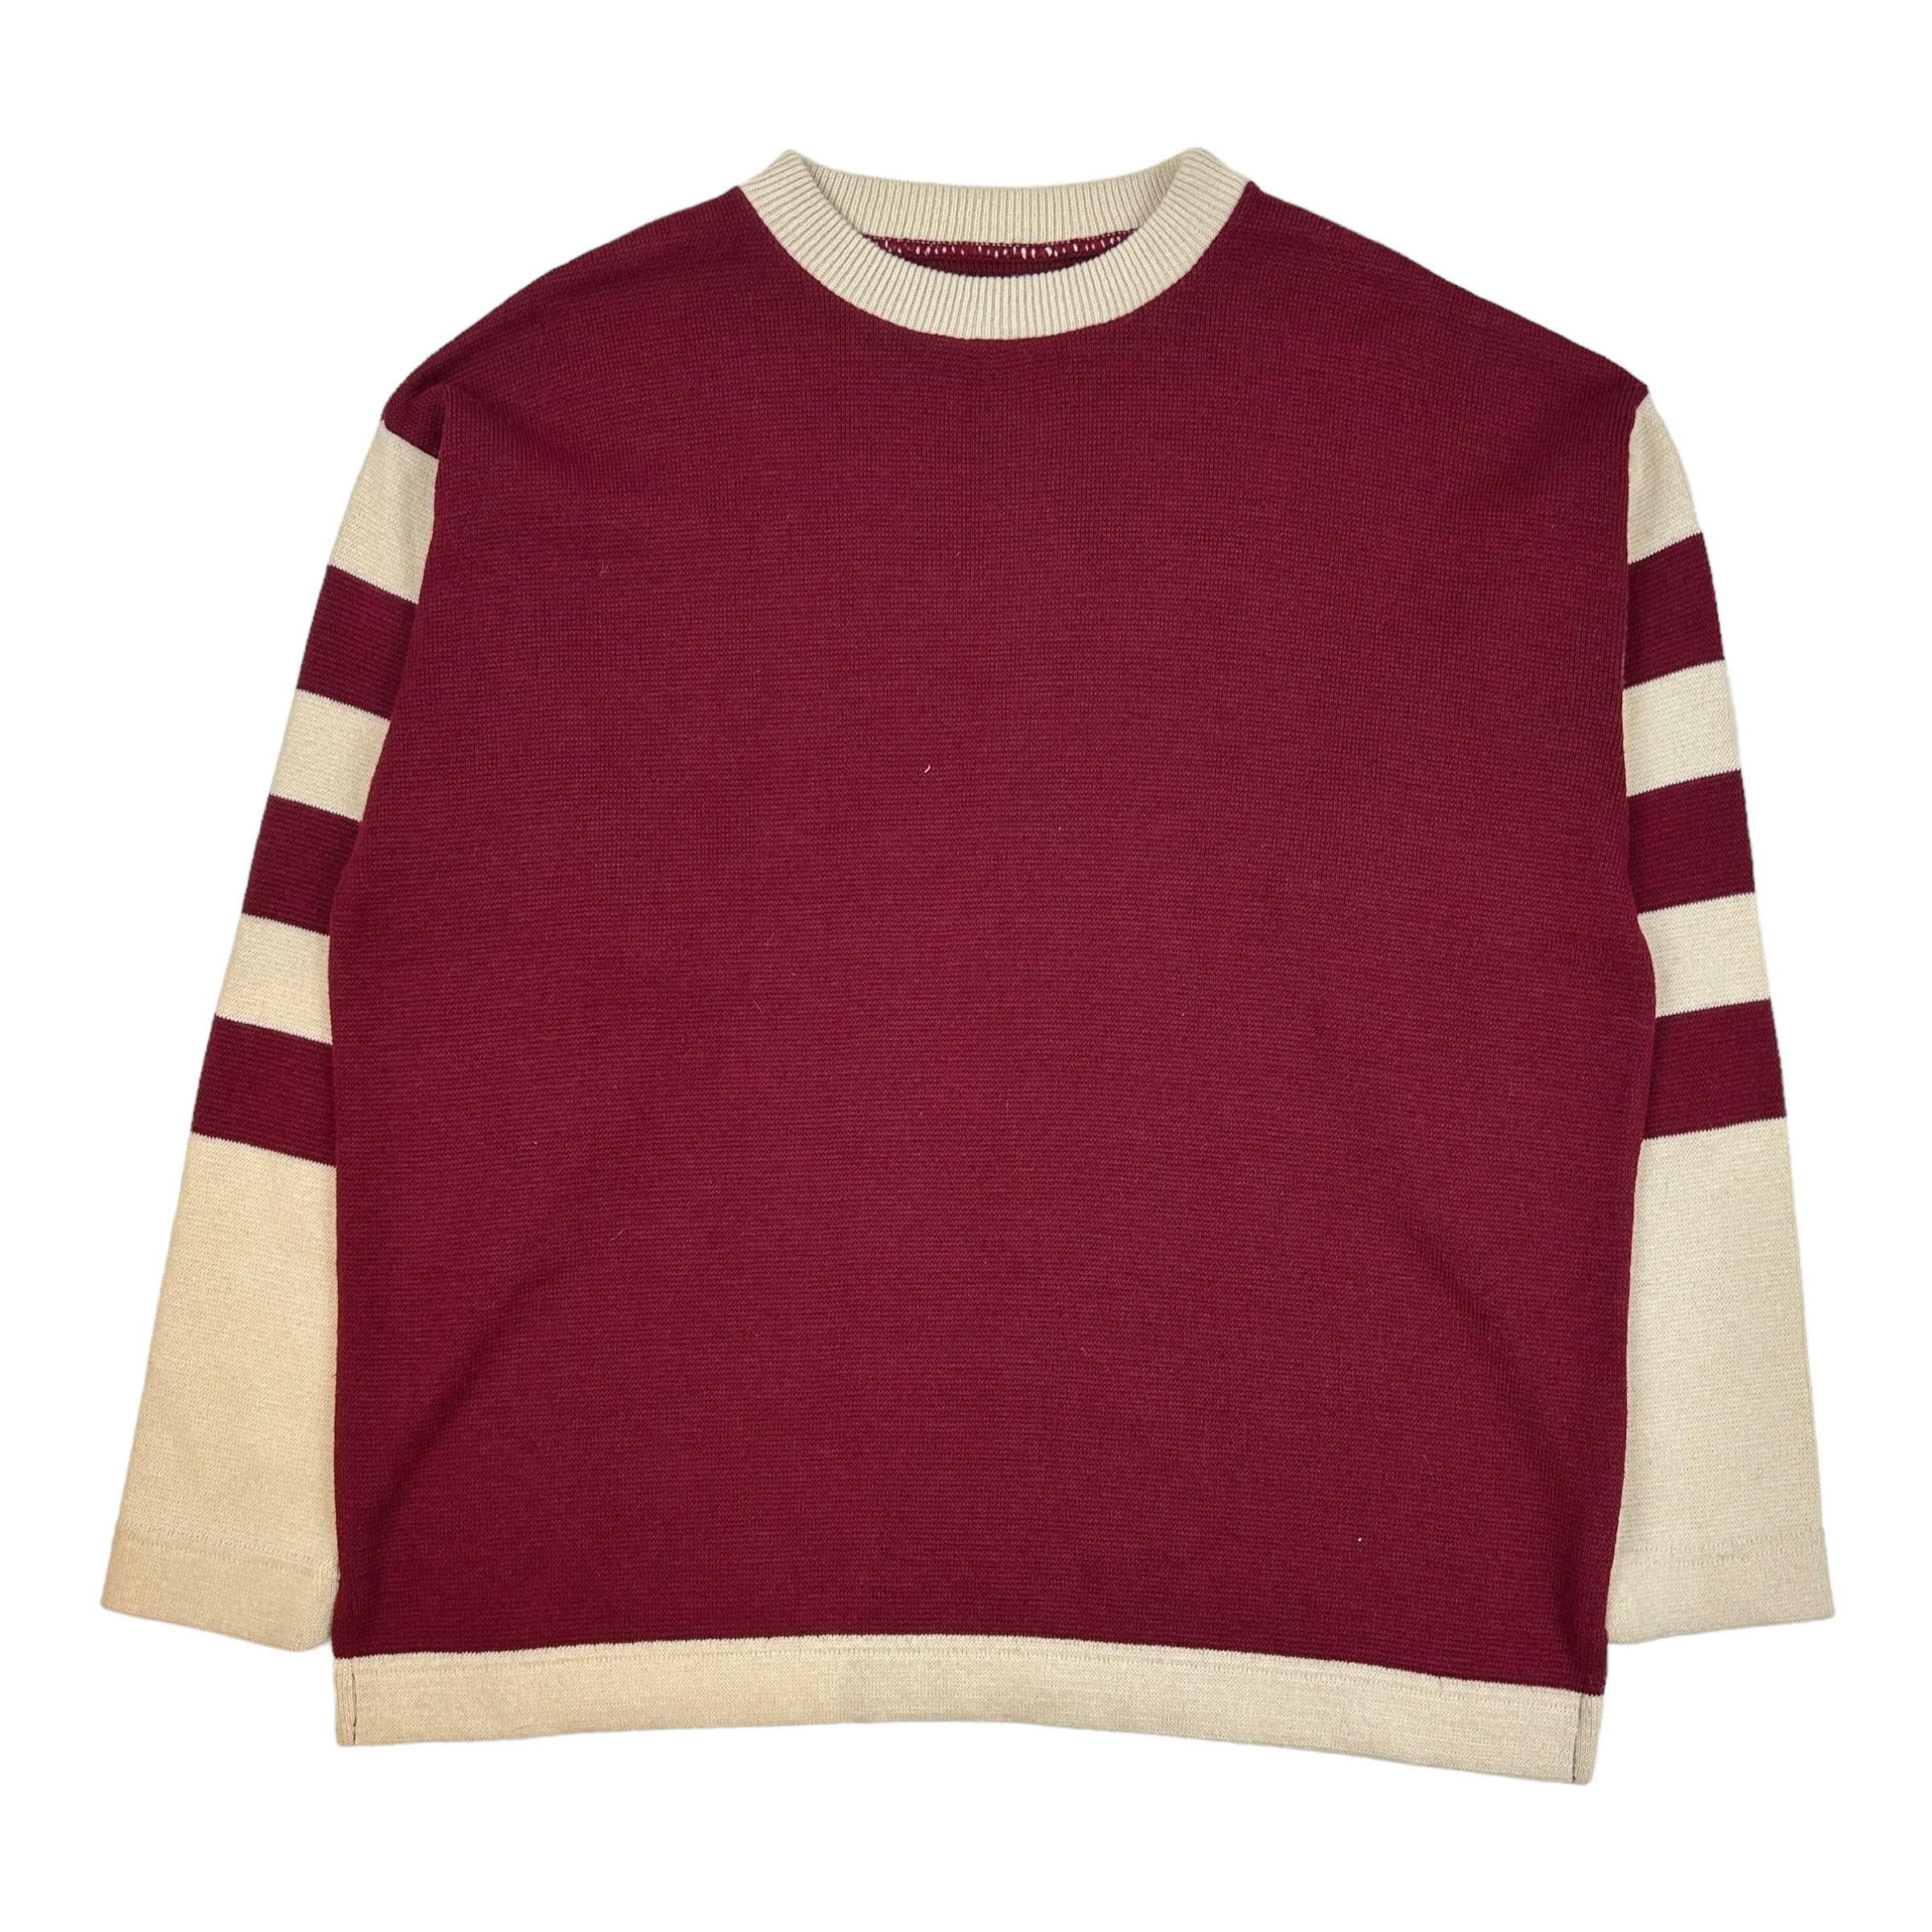 Vintage Ebbets Field Sweater Red/White